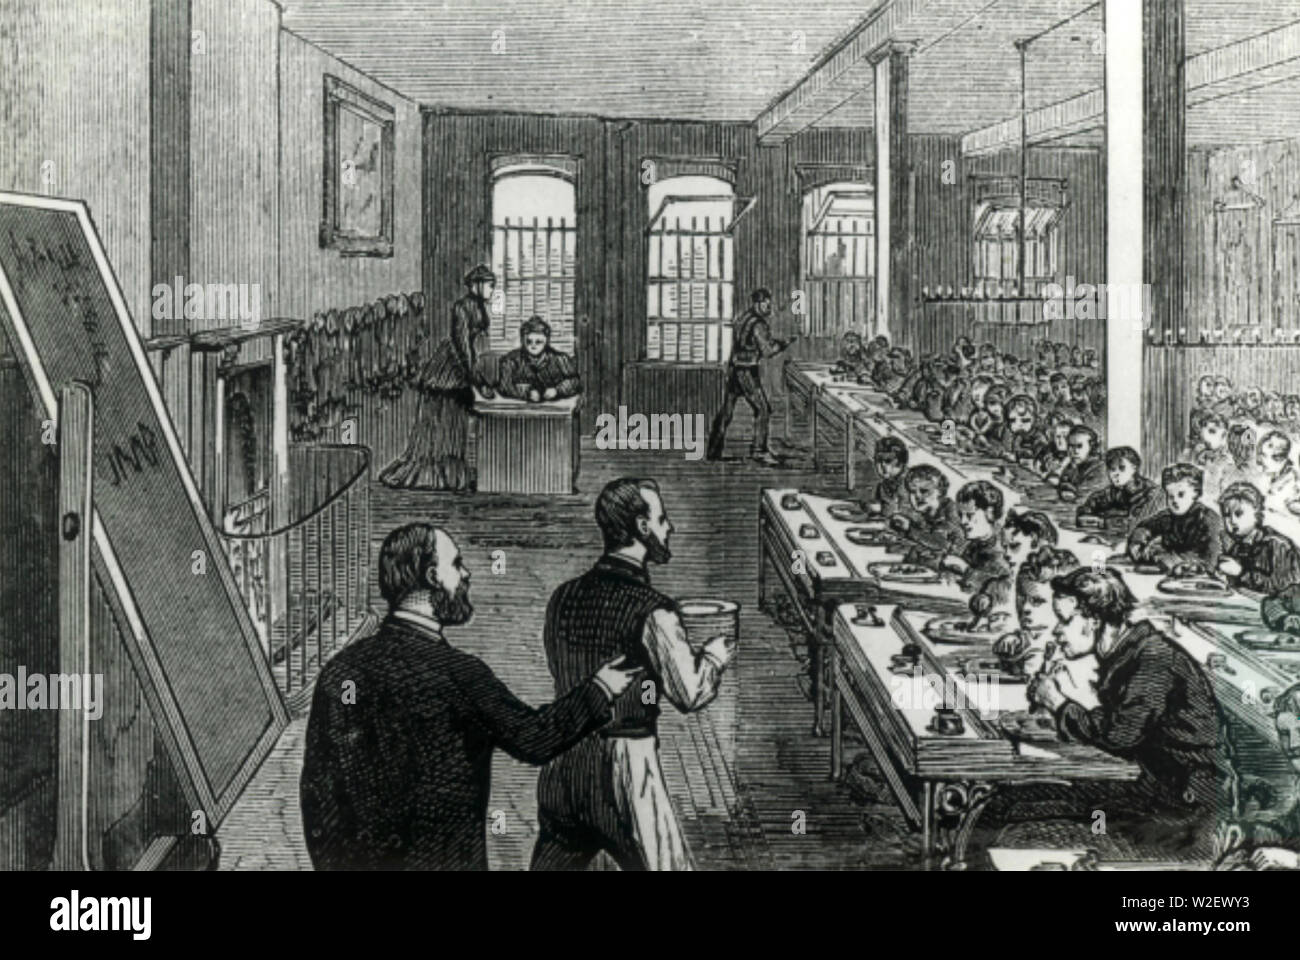 RAGGED SCHOOL Classroom at one of the  charity organisation schools providing free education to destitute children in mid-19th century England. Stock Photo